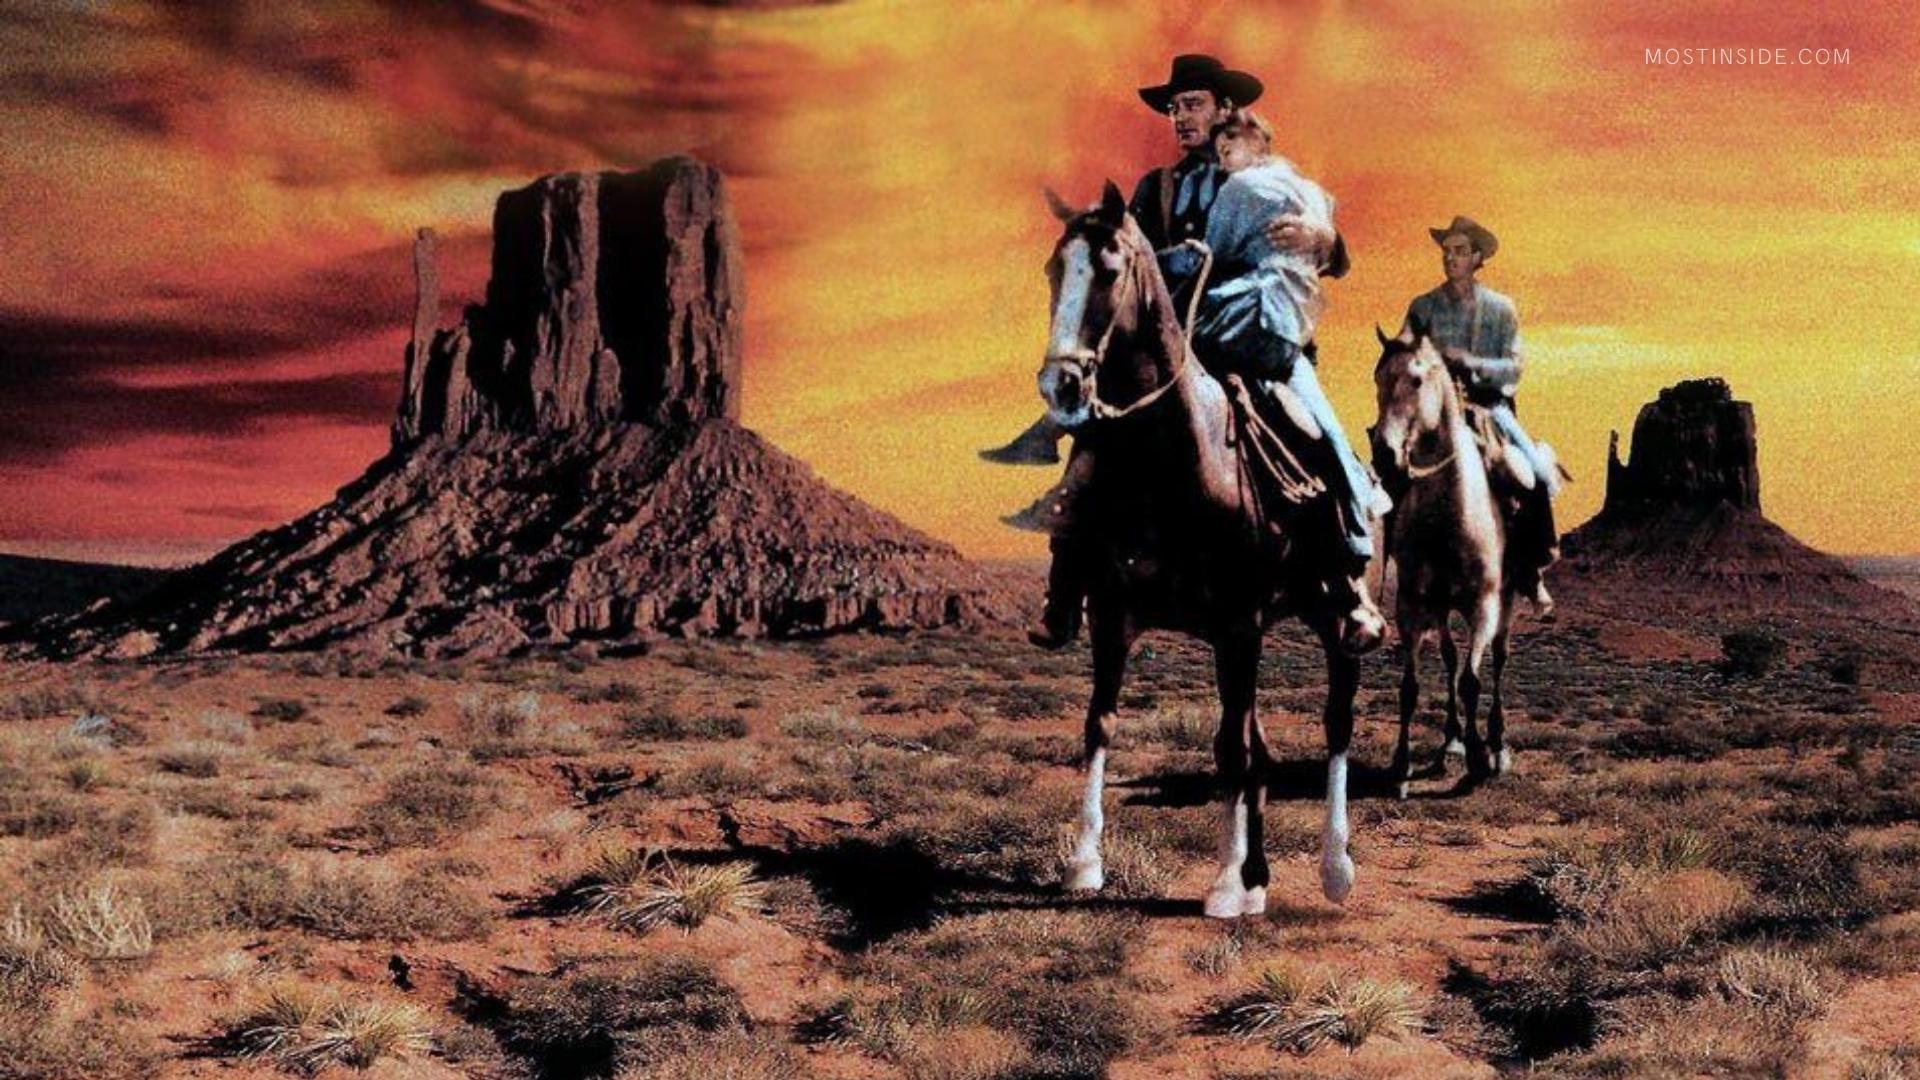 The Searchers Movie